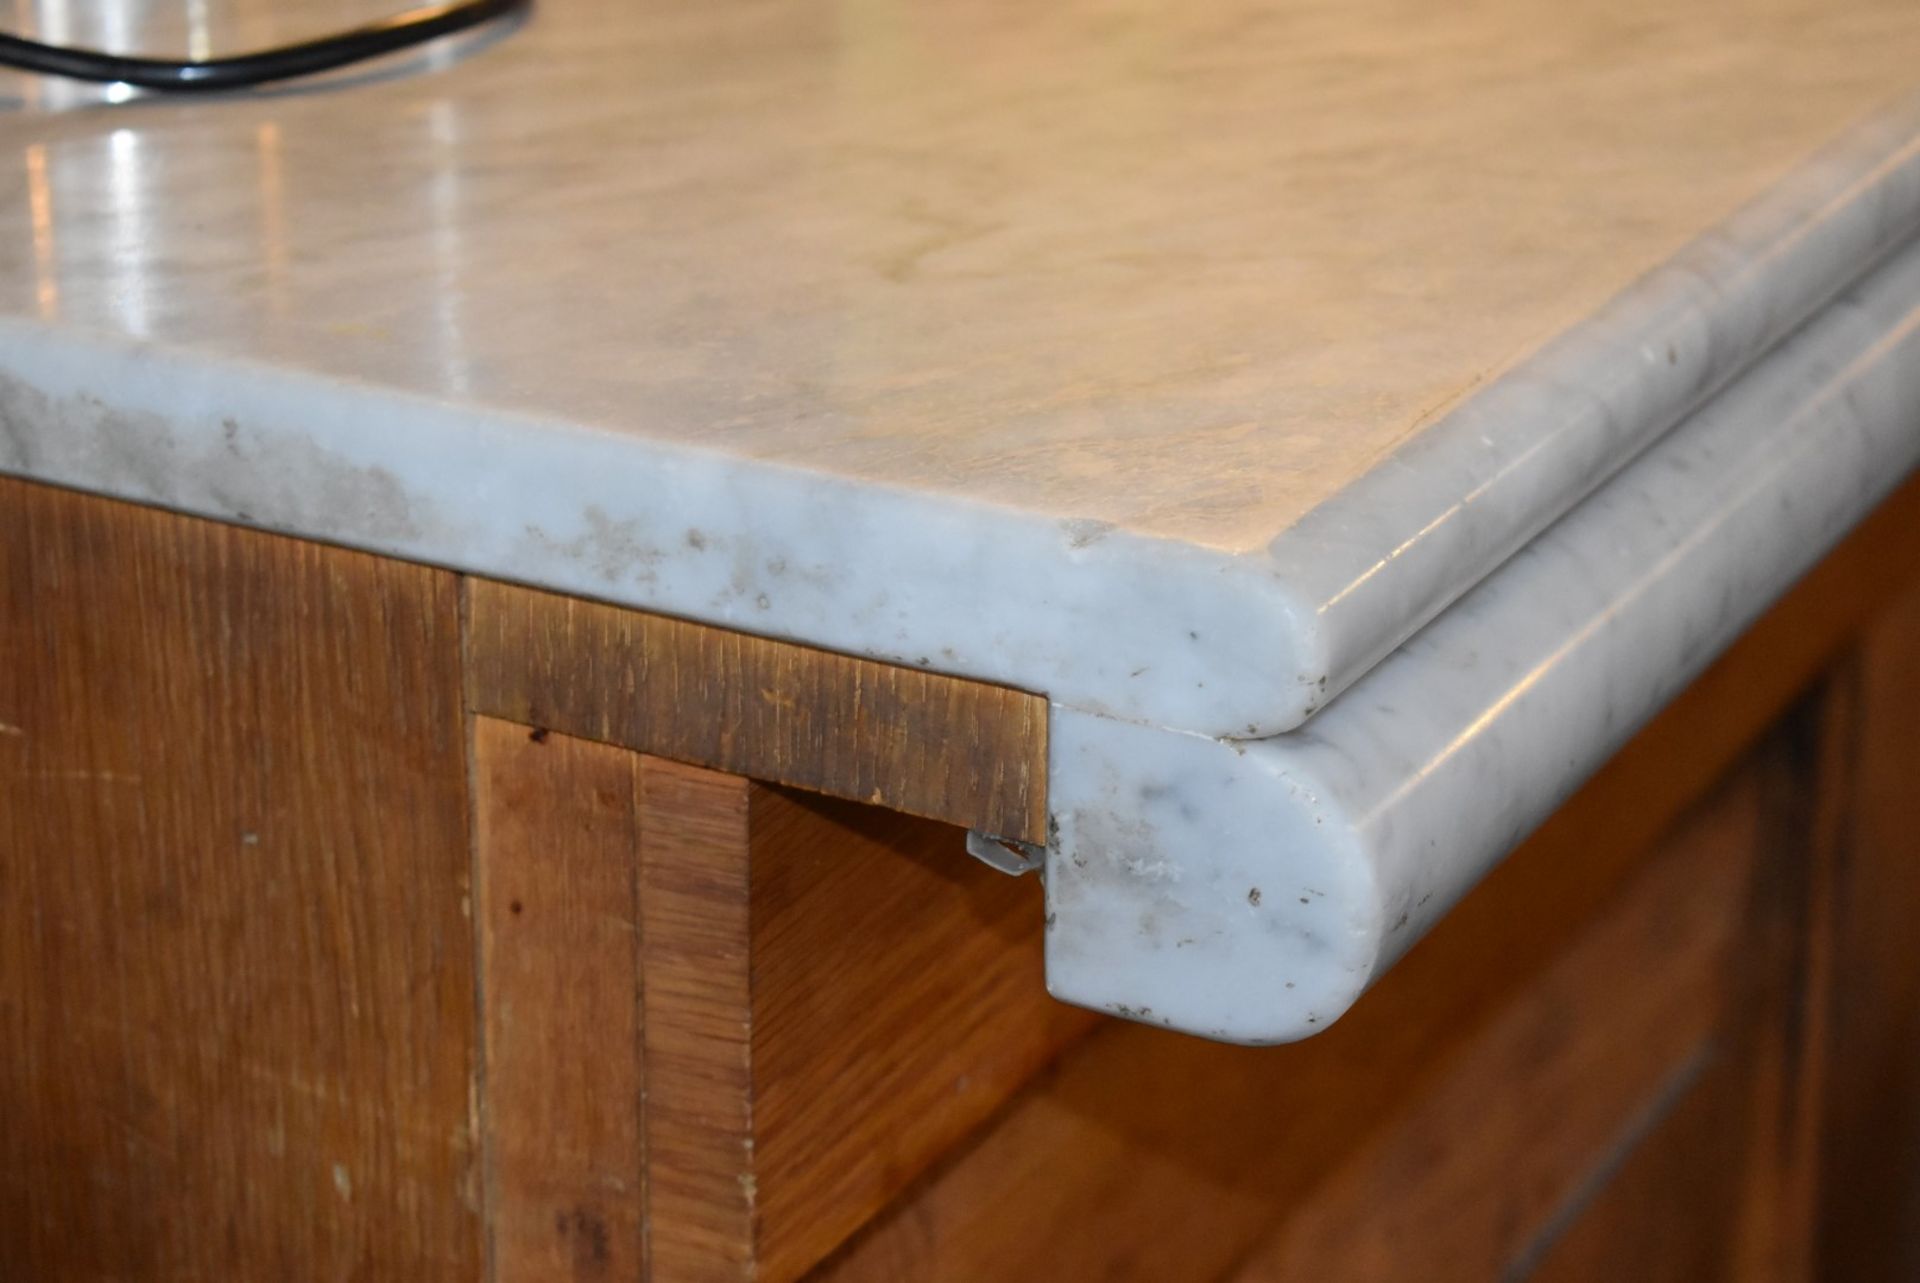 1 x Large 30ft Wood Panel Bar With White Marble Top, Heated Glass Gantry and Chrome Foot Rail - Image 5 of 22